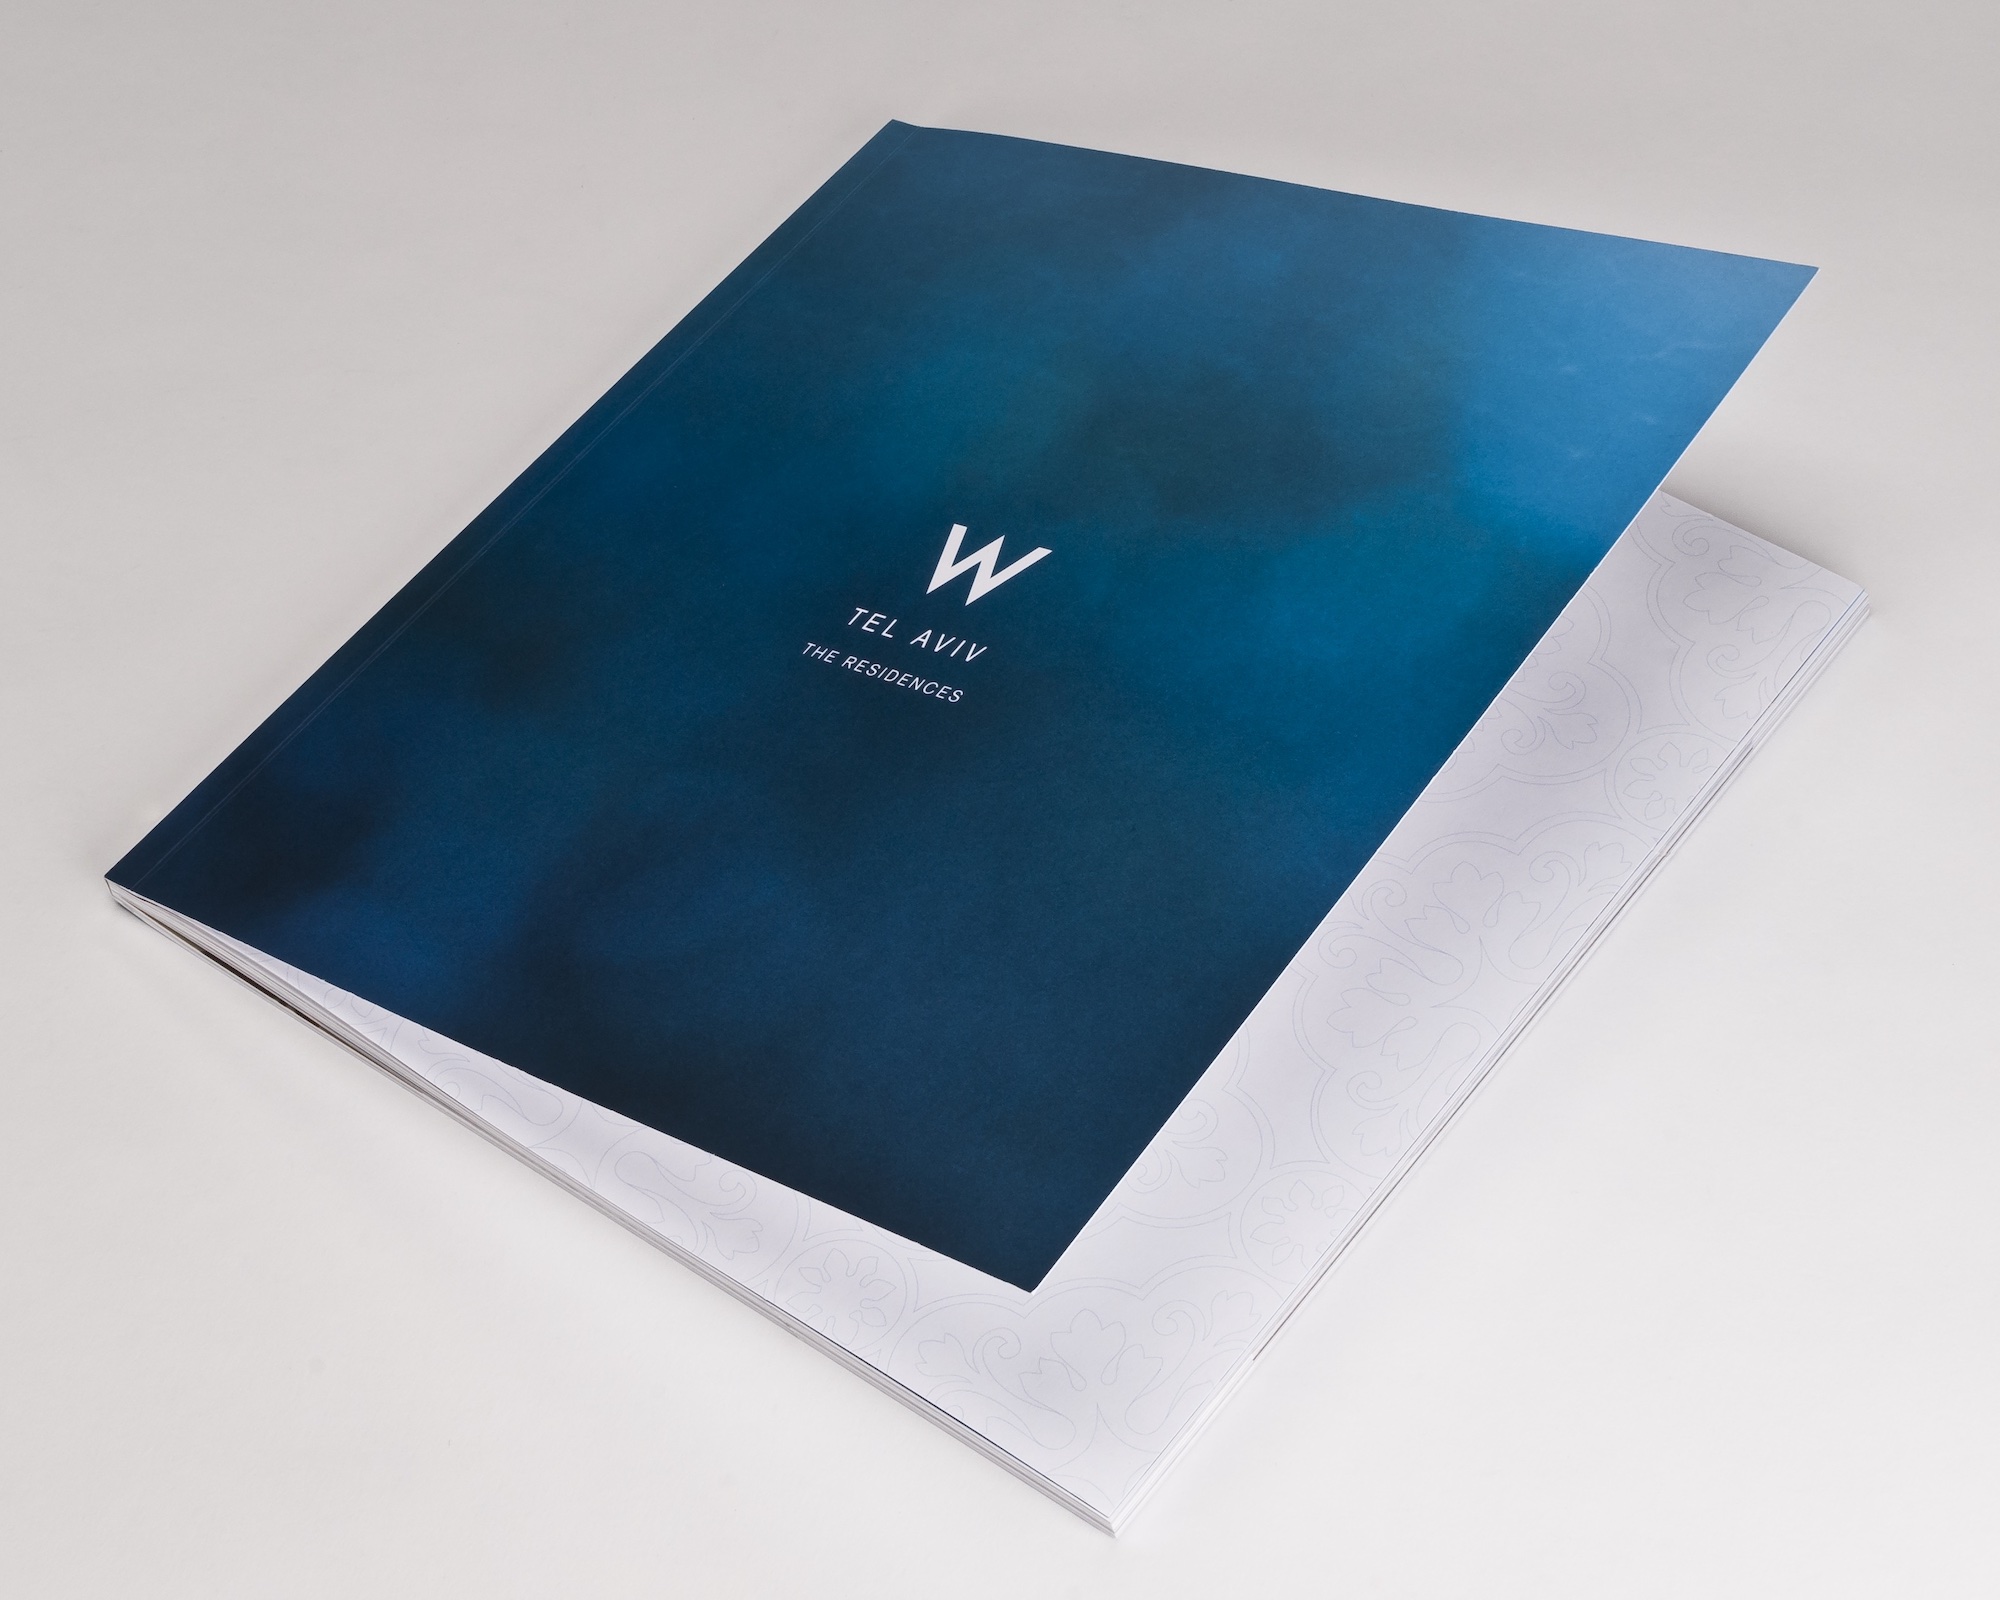 Print collateral for W Tel Aviv